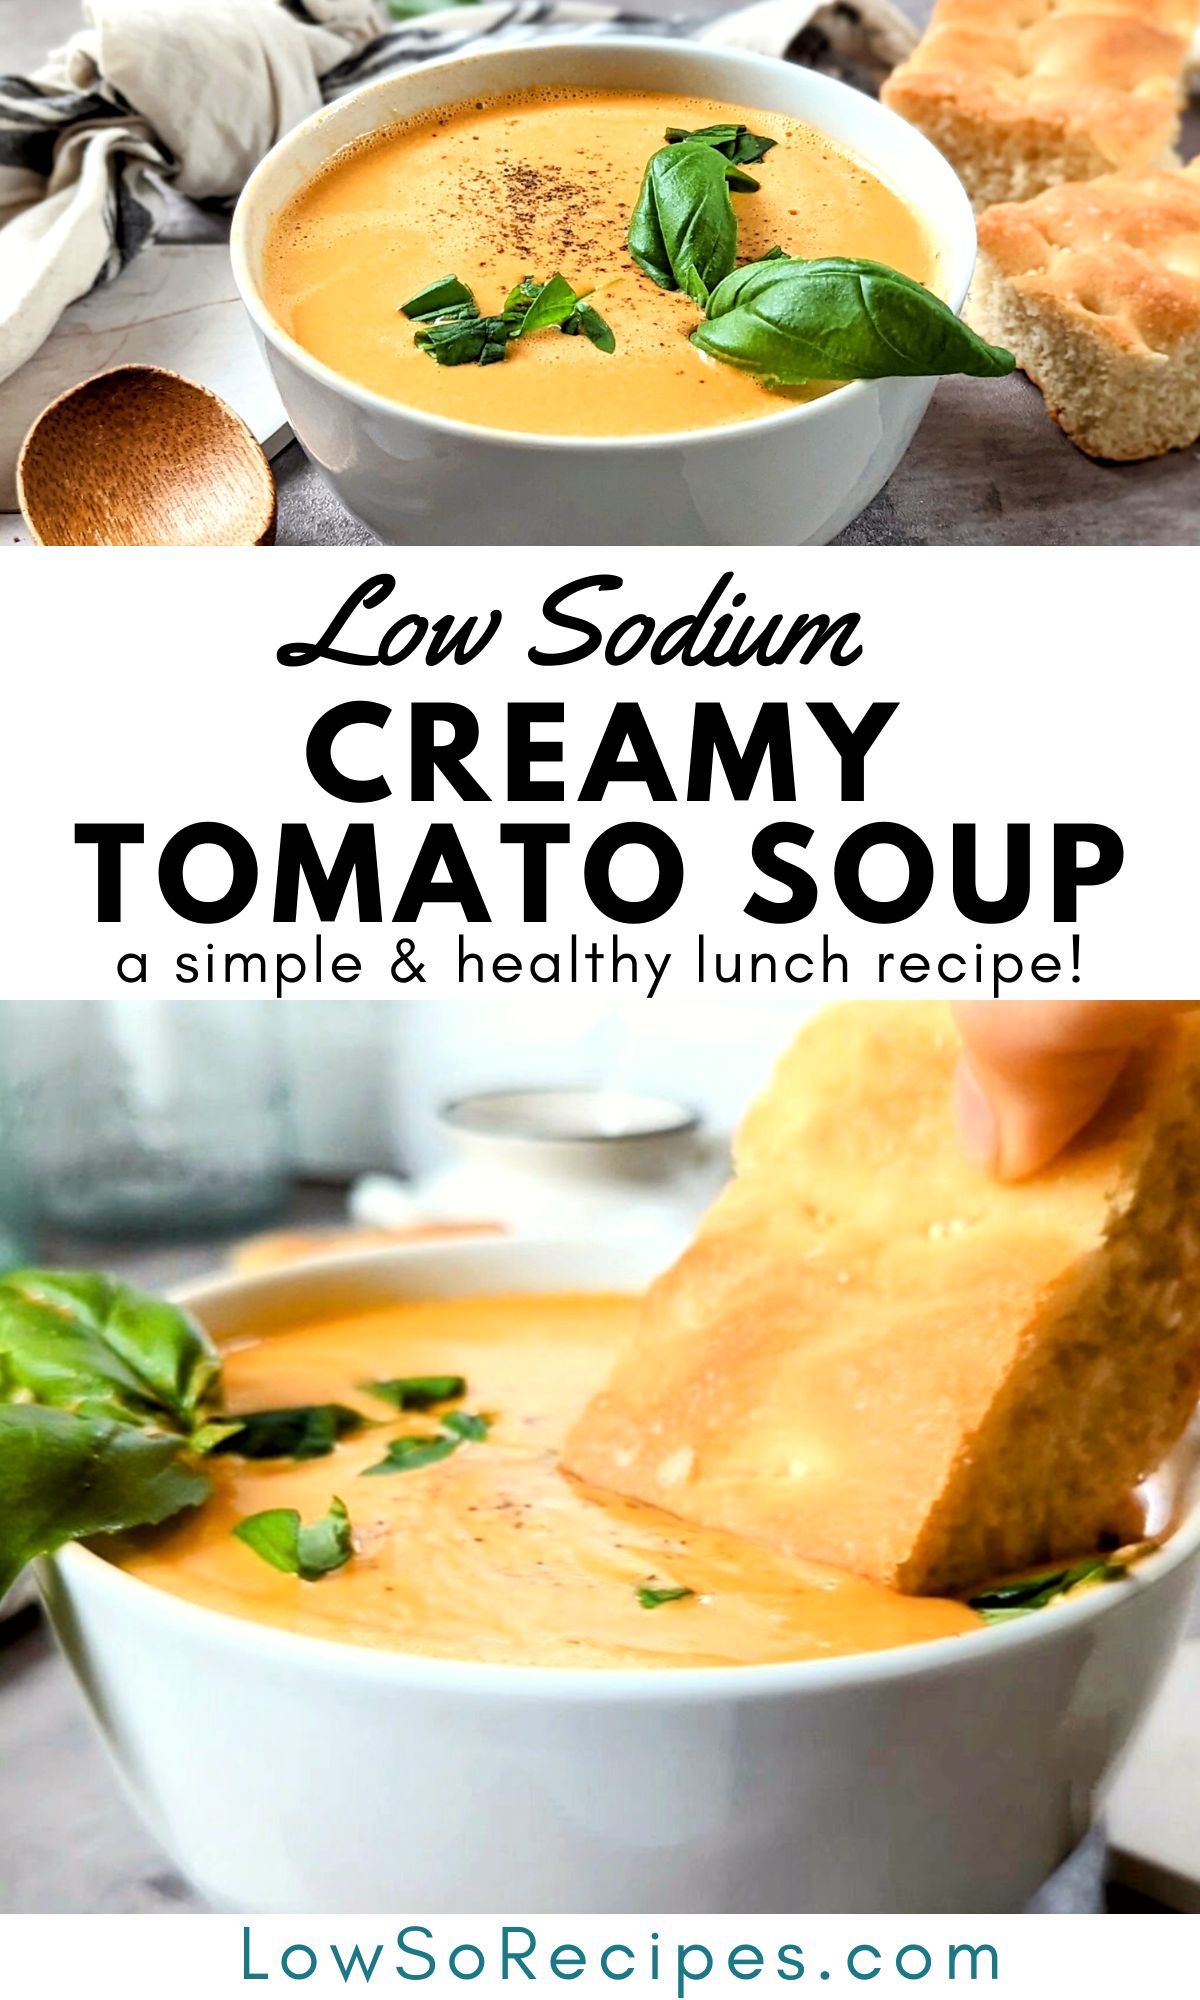 low sodium creamy tomato soup low salt recipes healthy tomato soup with no milk vegetarian low sodium recipes without meat